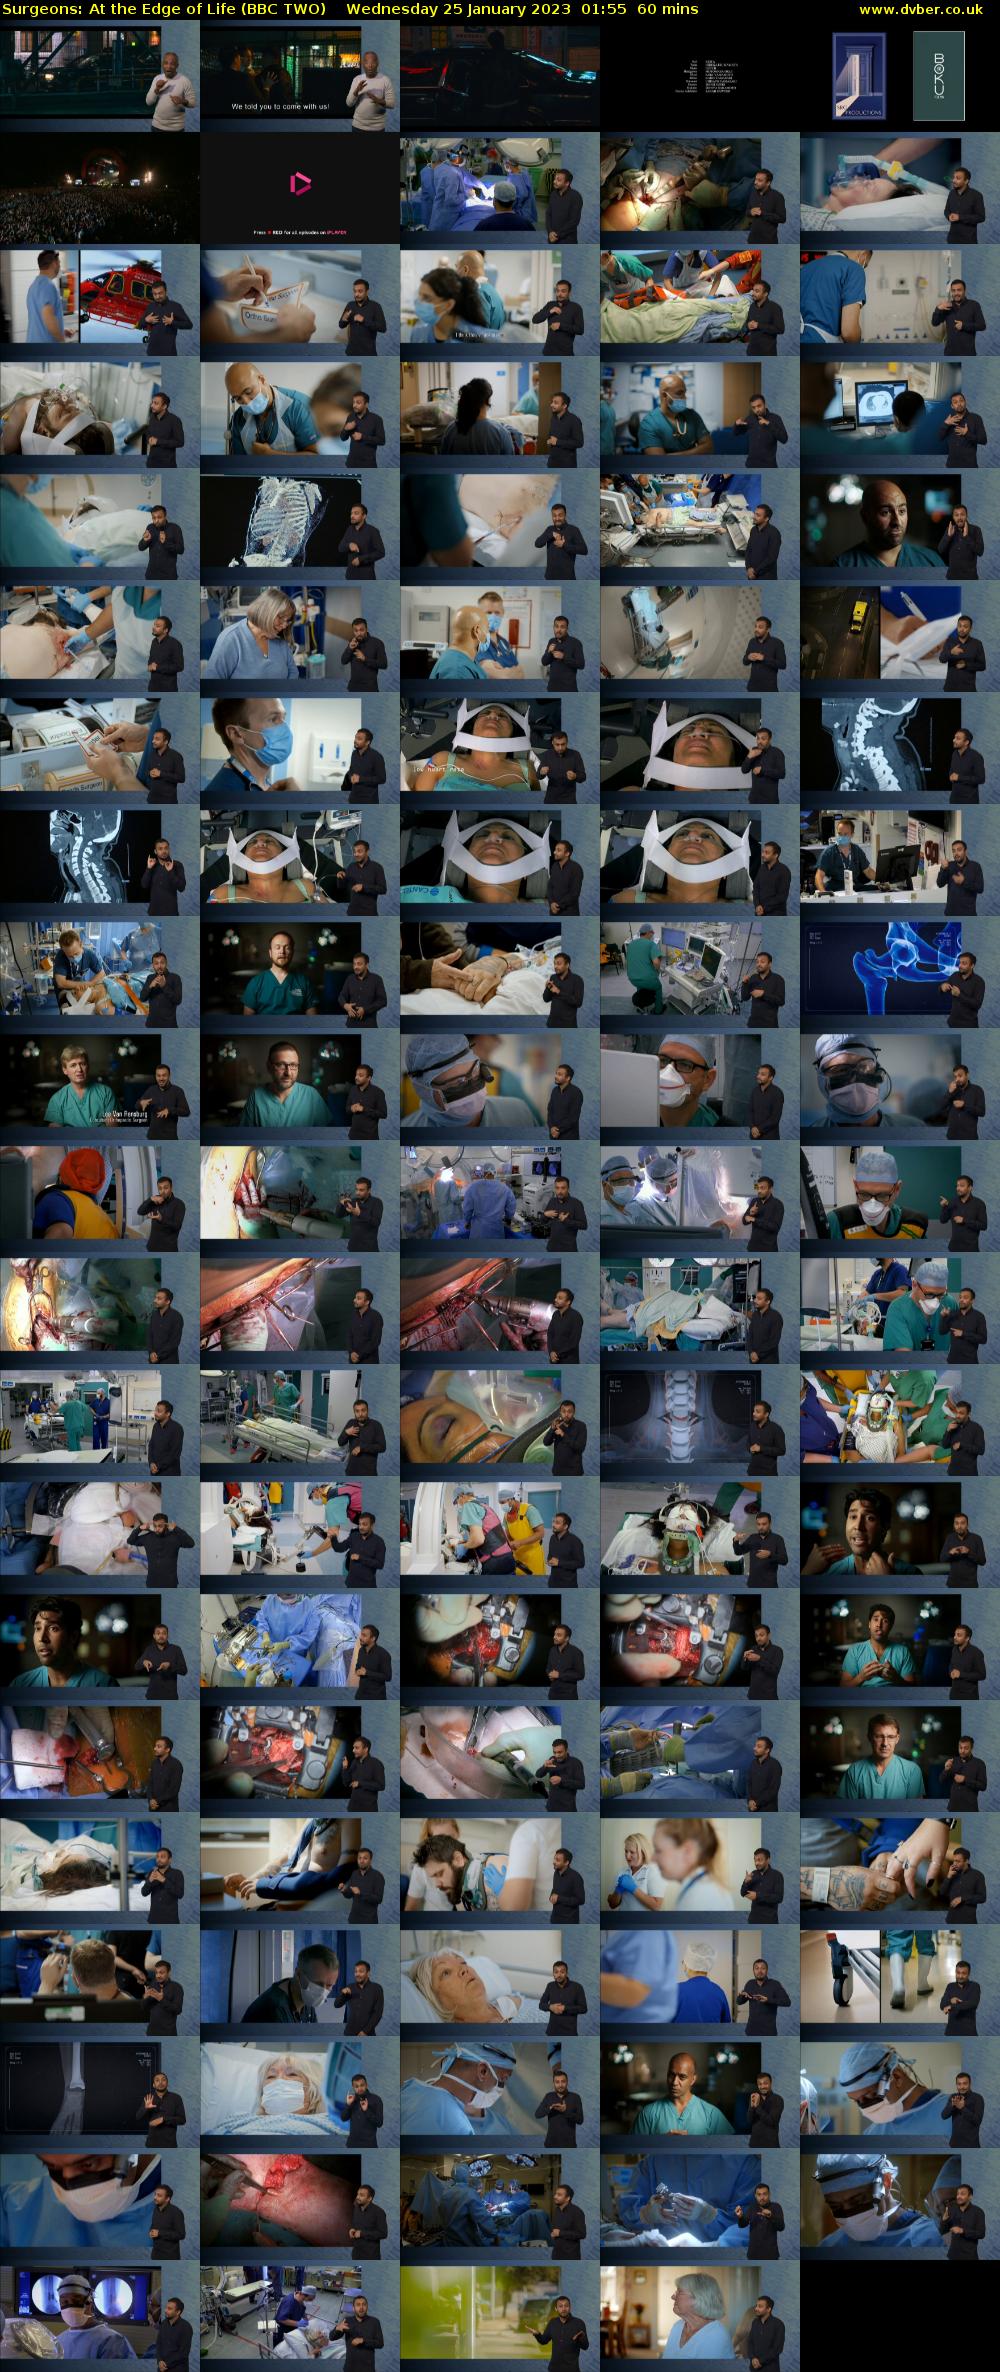 Surgeons: At the Edge of Life (BBC TWO) Wednesday 25 January 2023 01:55 - 02:55